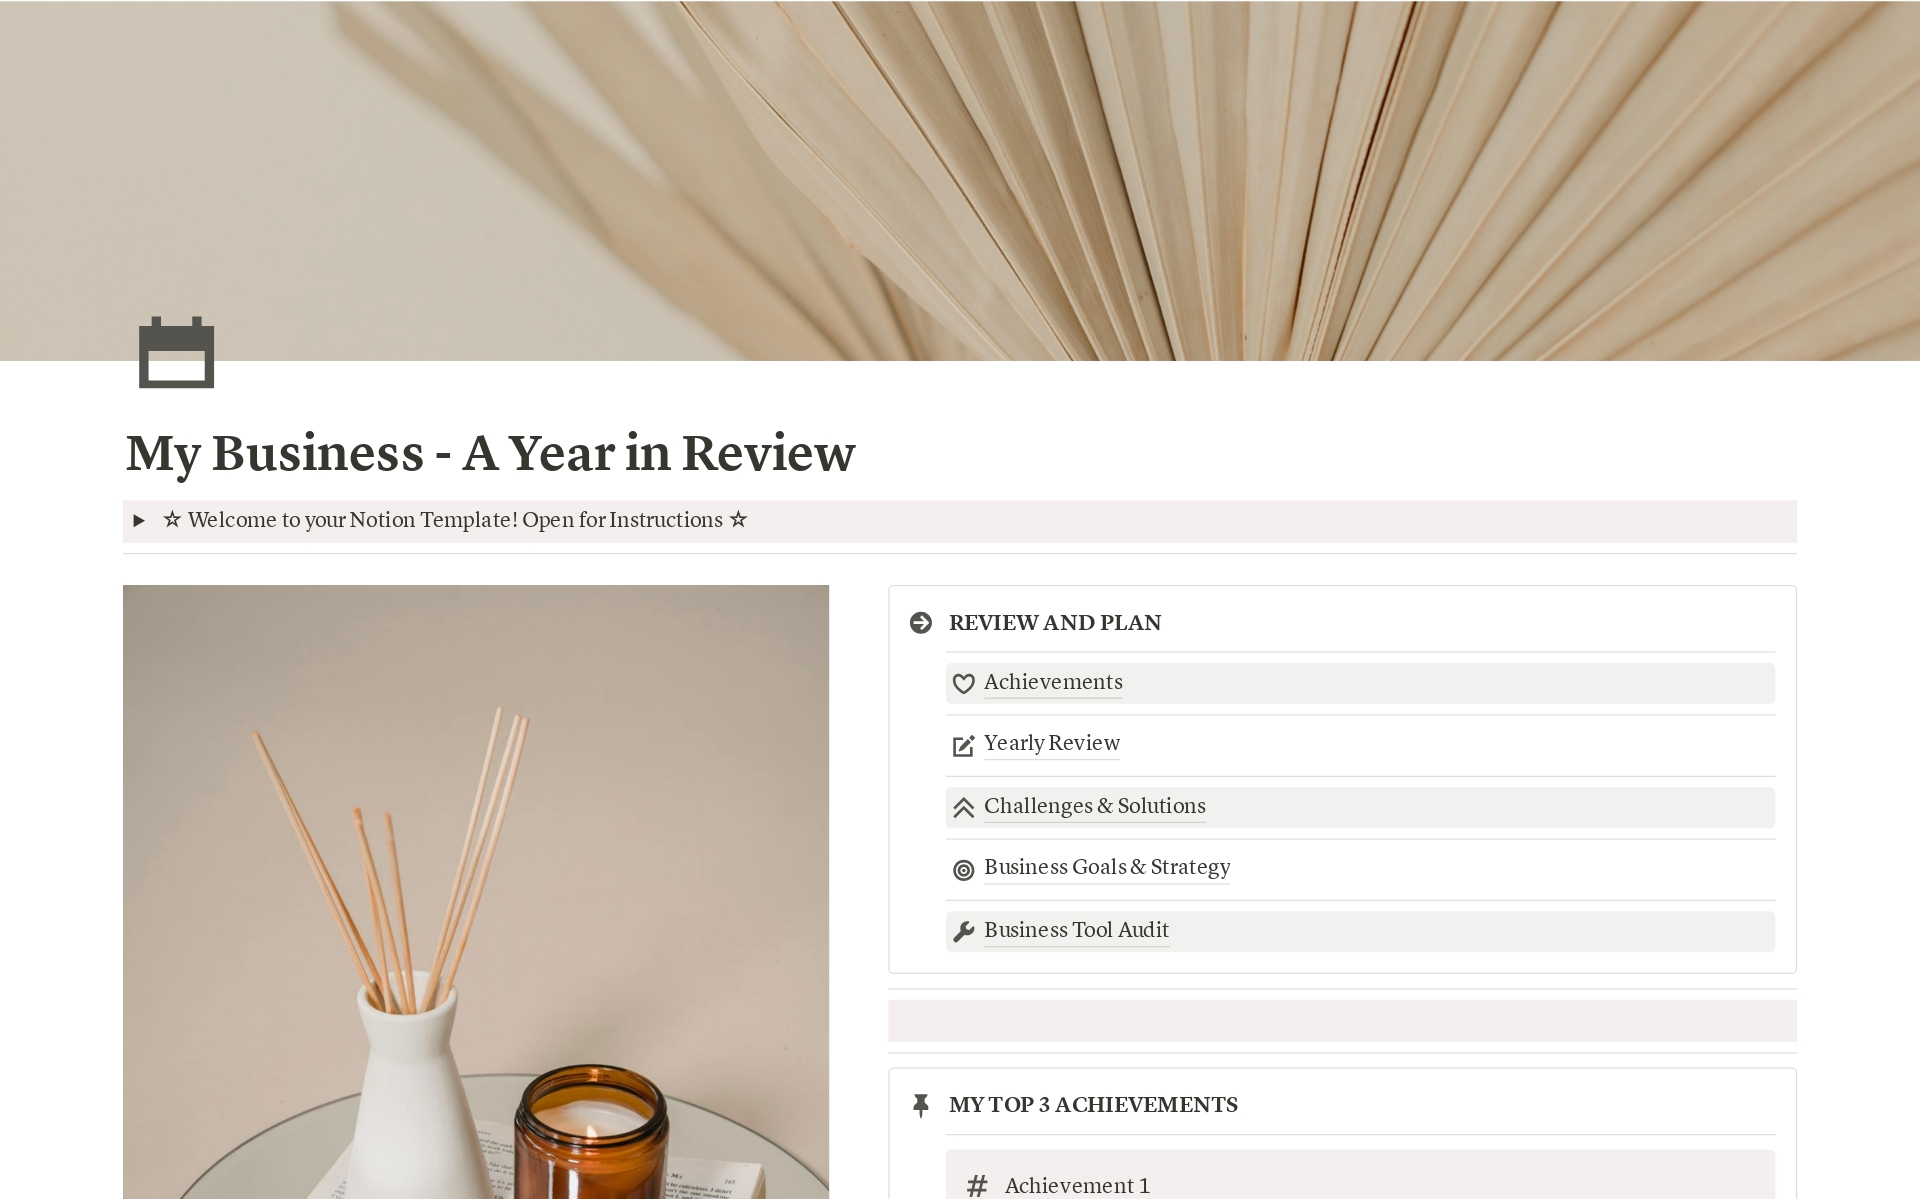 Mallin esikatselu nimelle My Business - A Year in Review